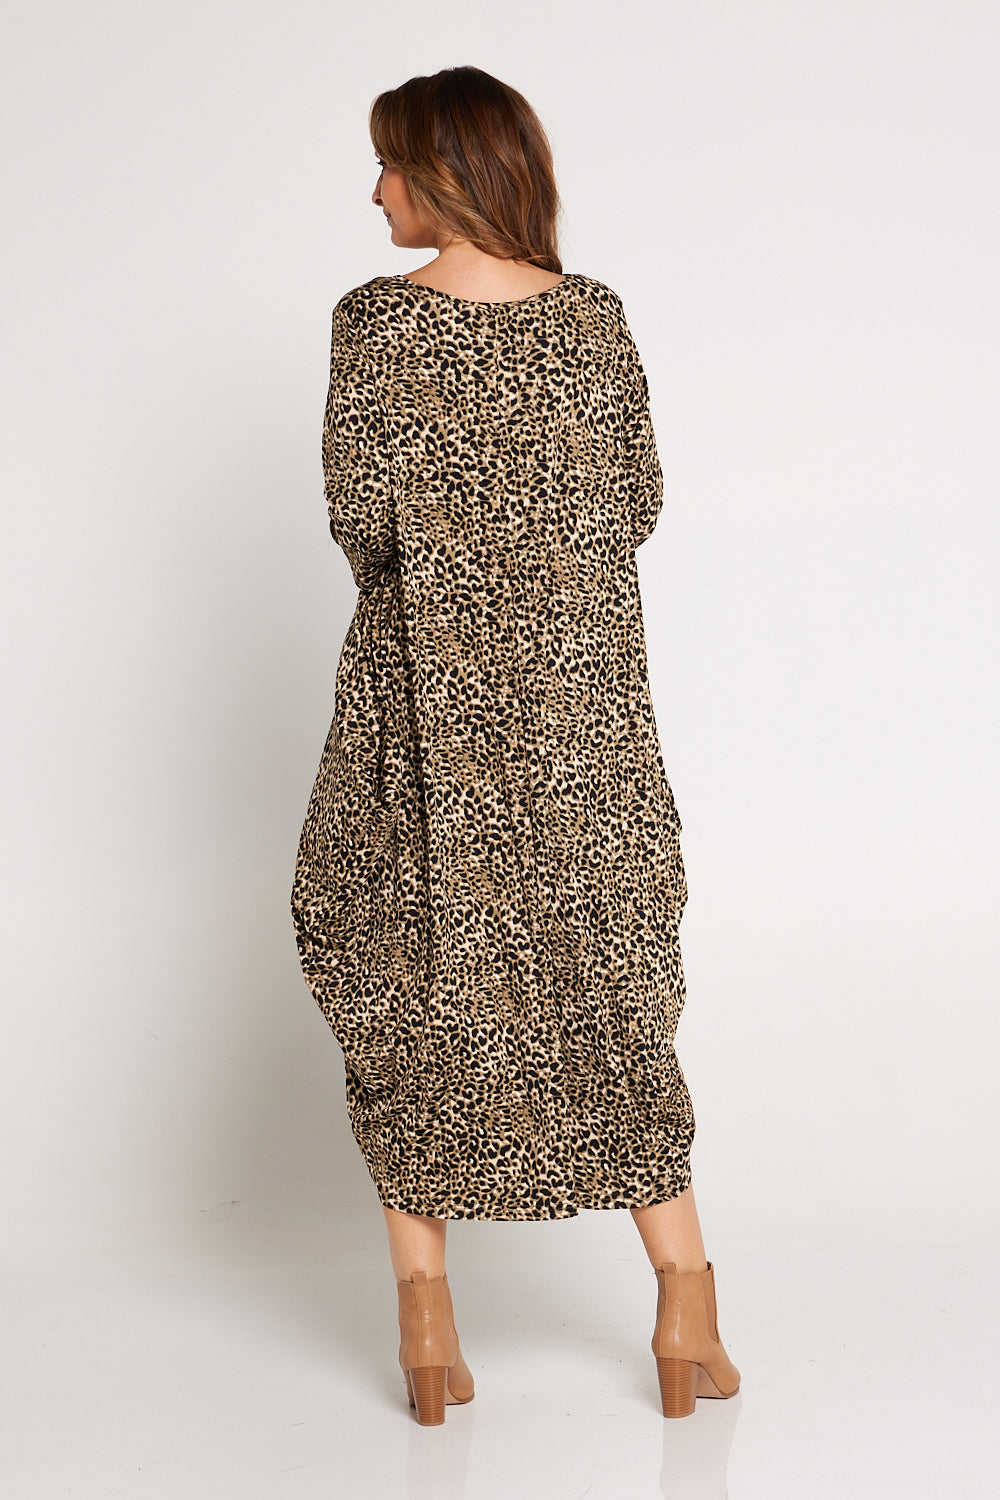 Leish Ribbed Dress - Leopard